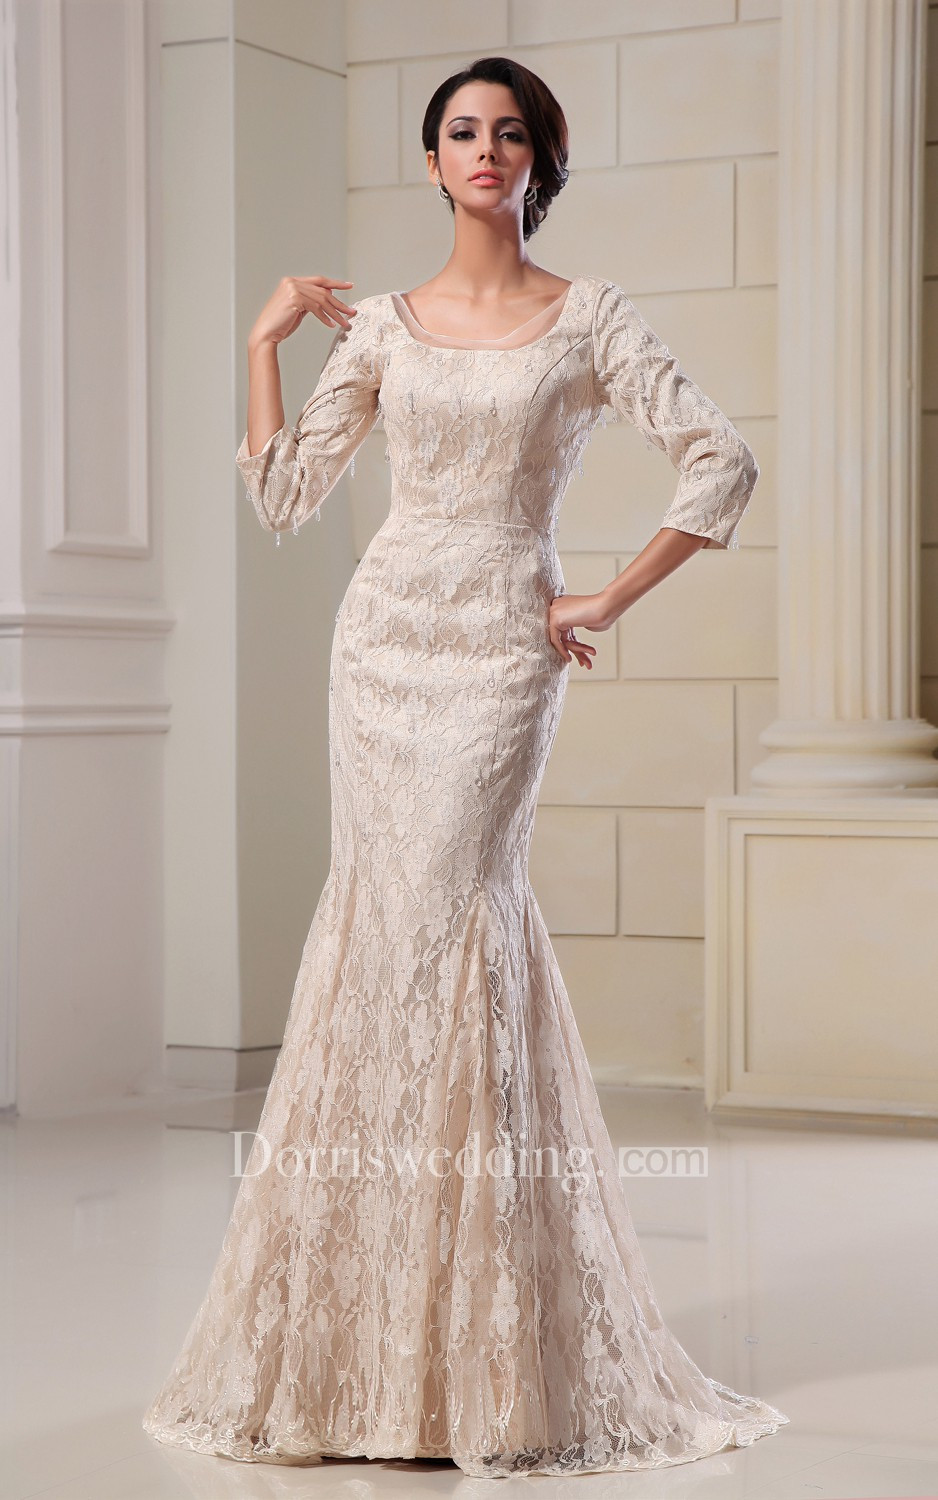 Wedding Gowns For Older Brides With Sleeves
 Square Neck Long Sleeve Mermaid Dress With Lace Appliques